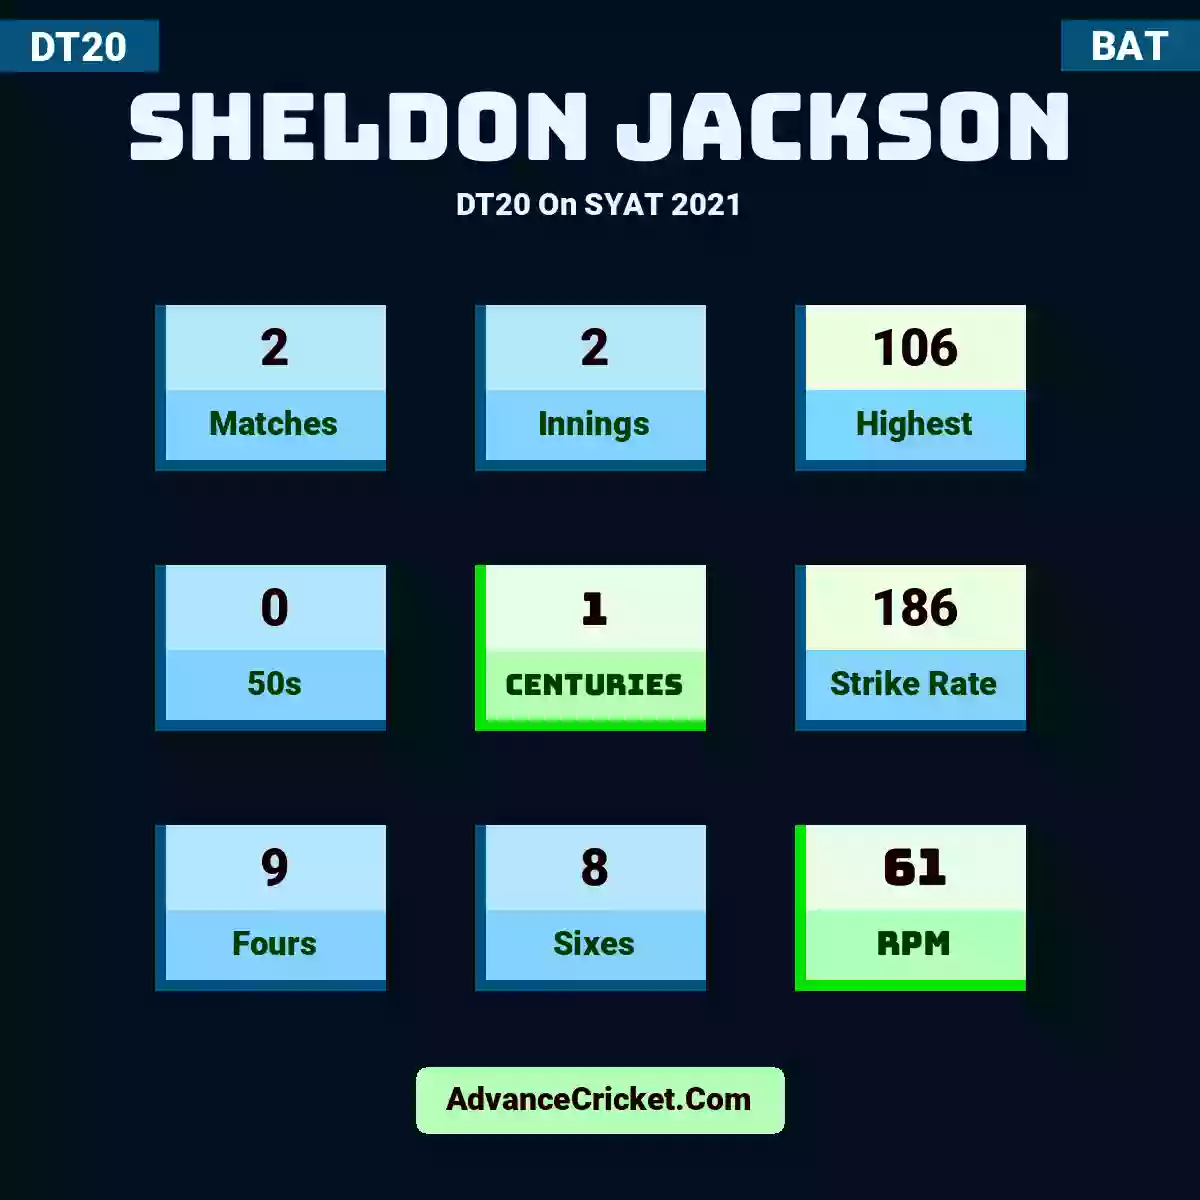 Sheldon Jackson DT20  On SYAT 2021, Sheldon Jackson played 2 matches, scored 106 runs as highest, 0 half-centuries, and 1 centuries, with a strike rate of 186. S.Jackson hit 9 fours and 8 sixes, with an RPM of 61.